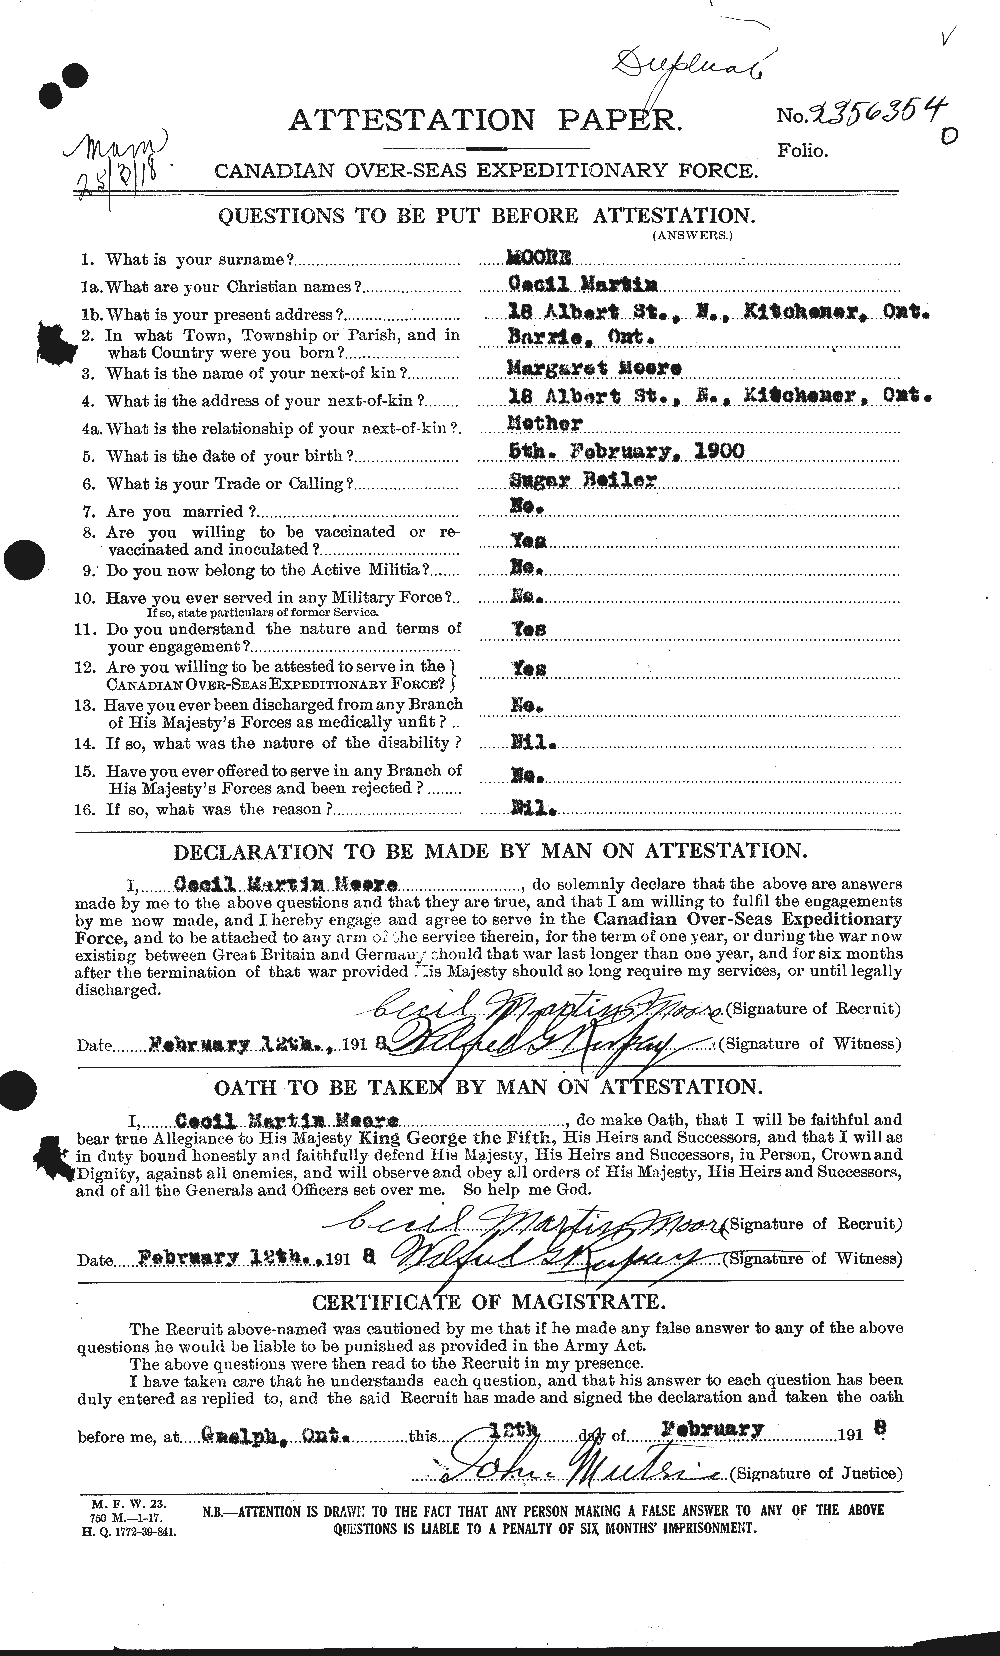 Personnel Records of the First World War - CEF 506475a